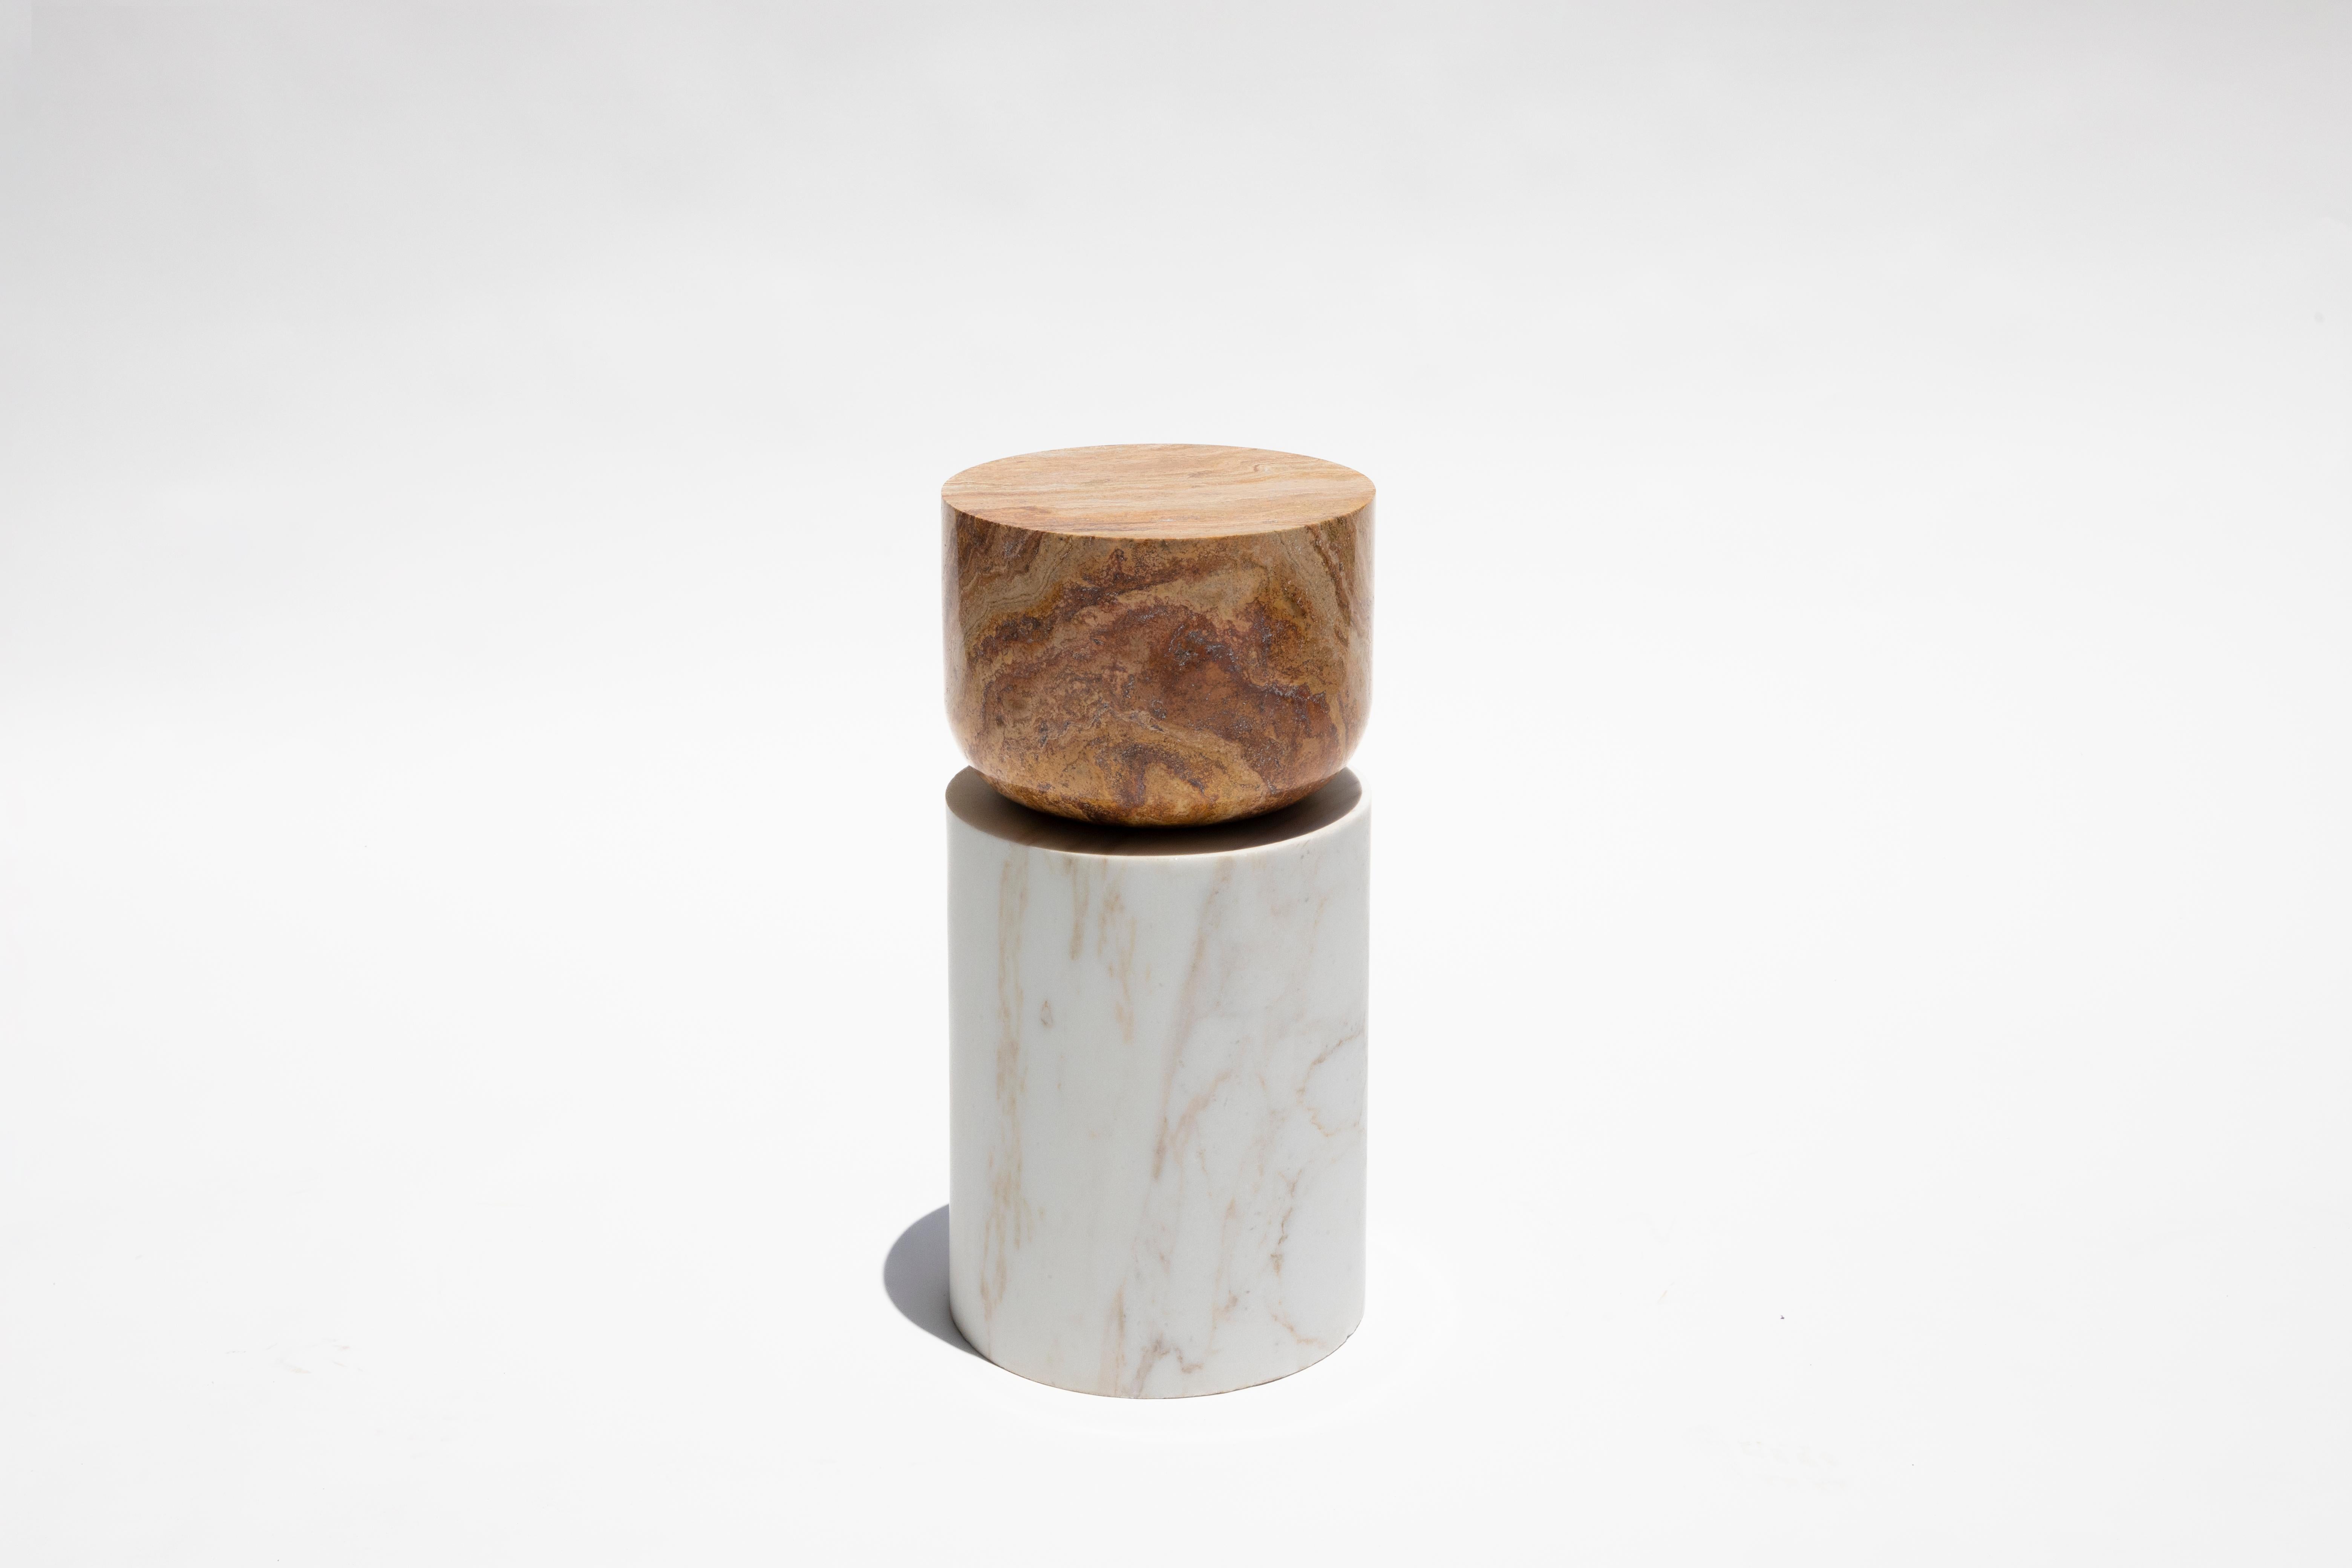 Organic Modern Volcanic Shade of Marble V Stool/Table by Sten Studio, REP by Tuleste Factory